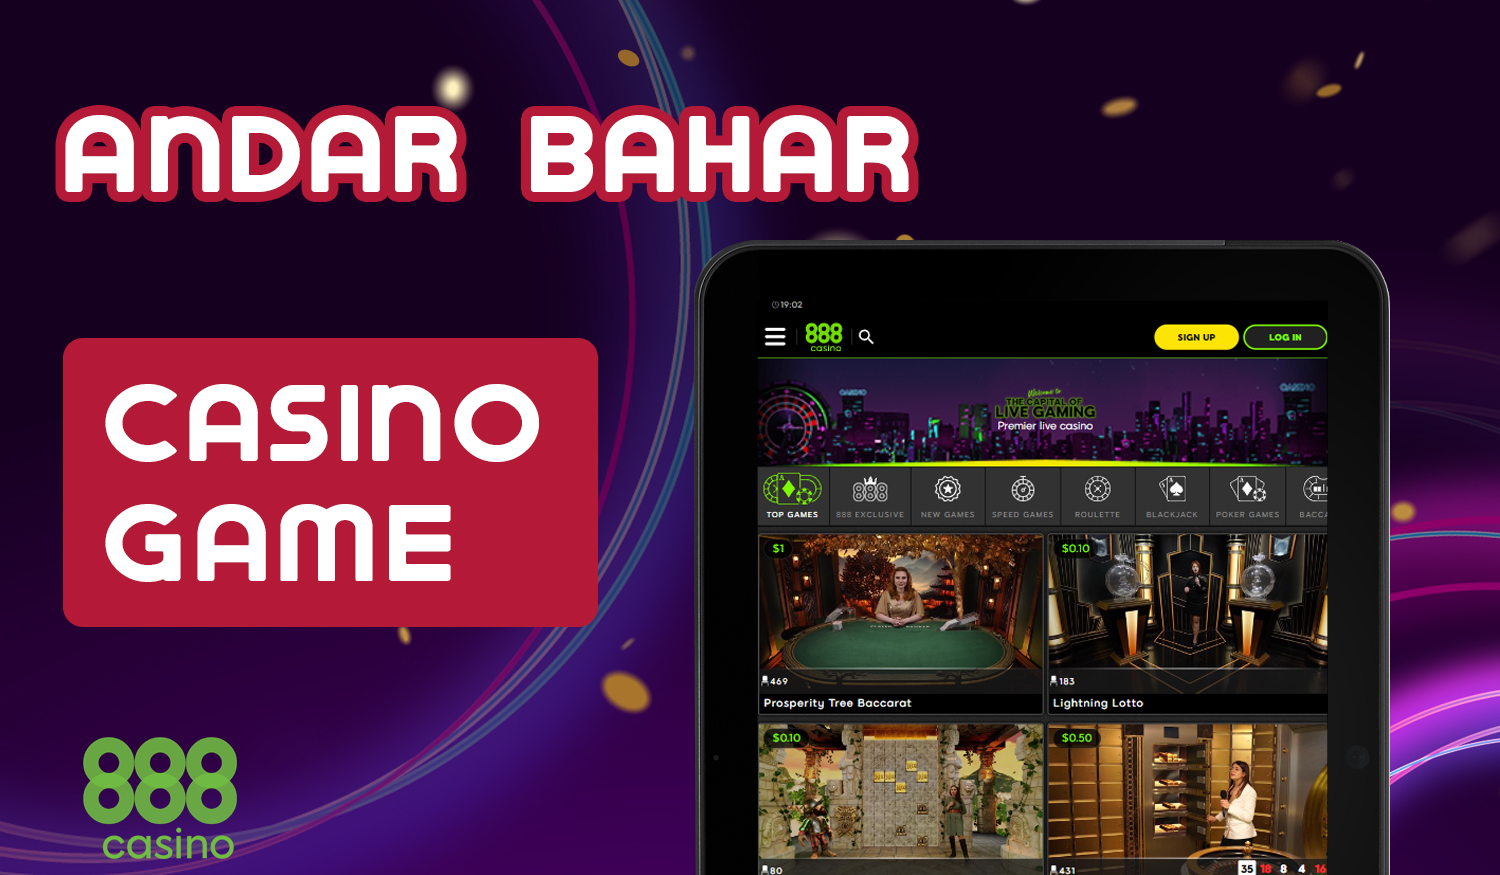 What games are available in the online casino section of 888 website